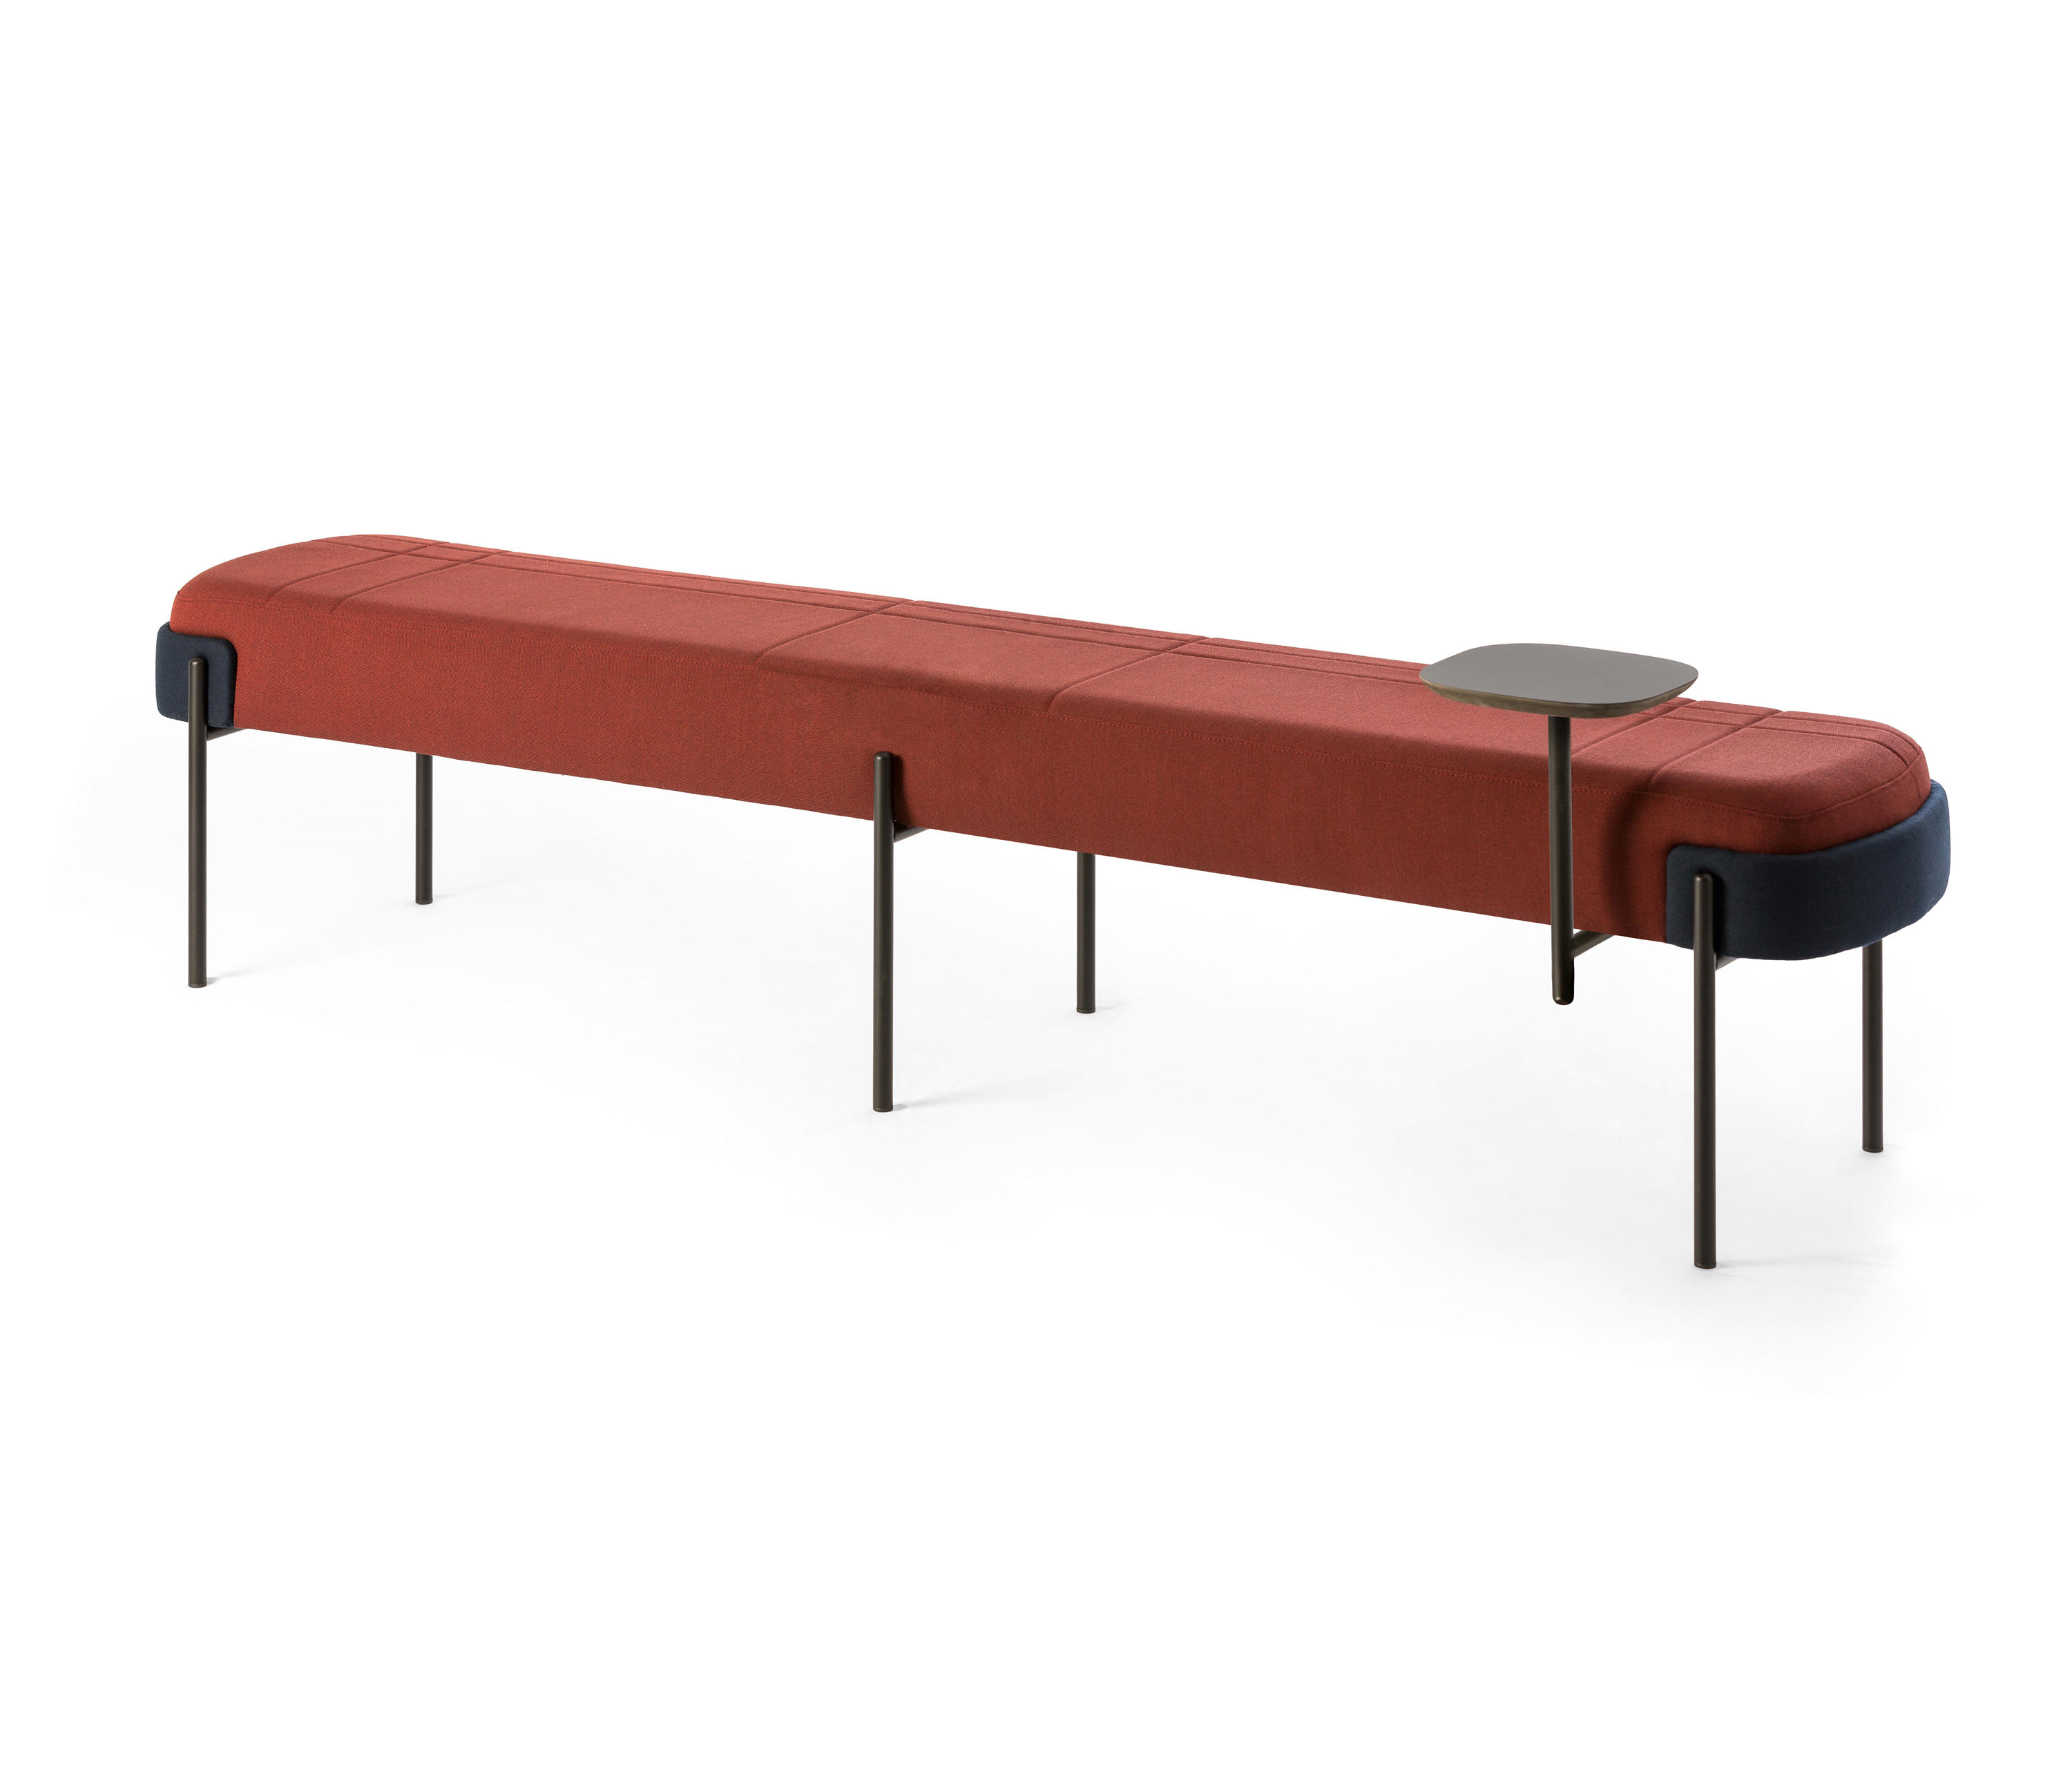 Wam Bench Benches From Bross Architonic